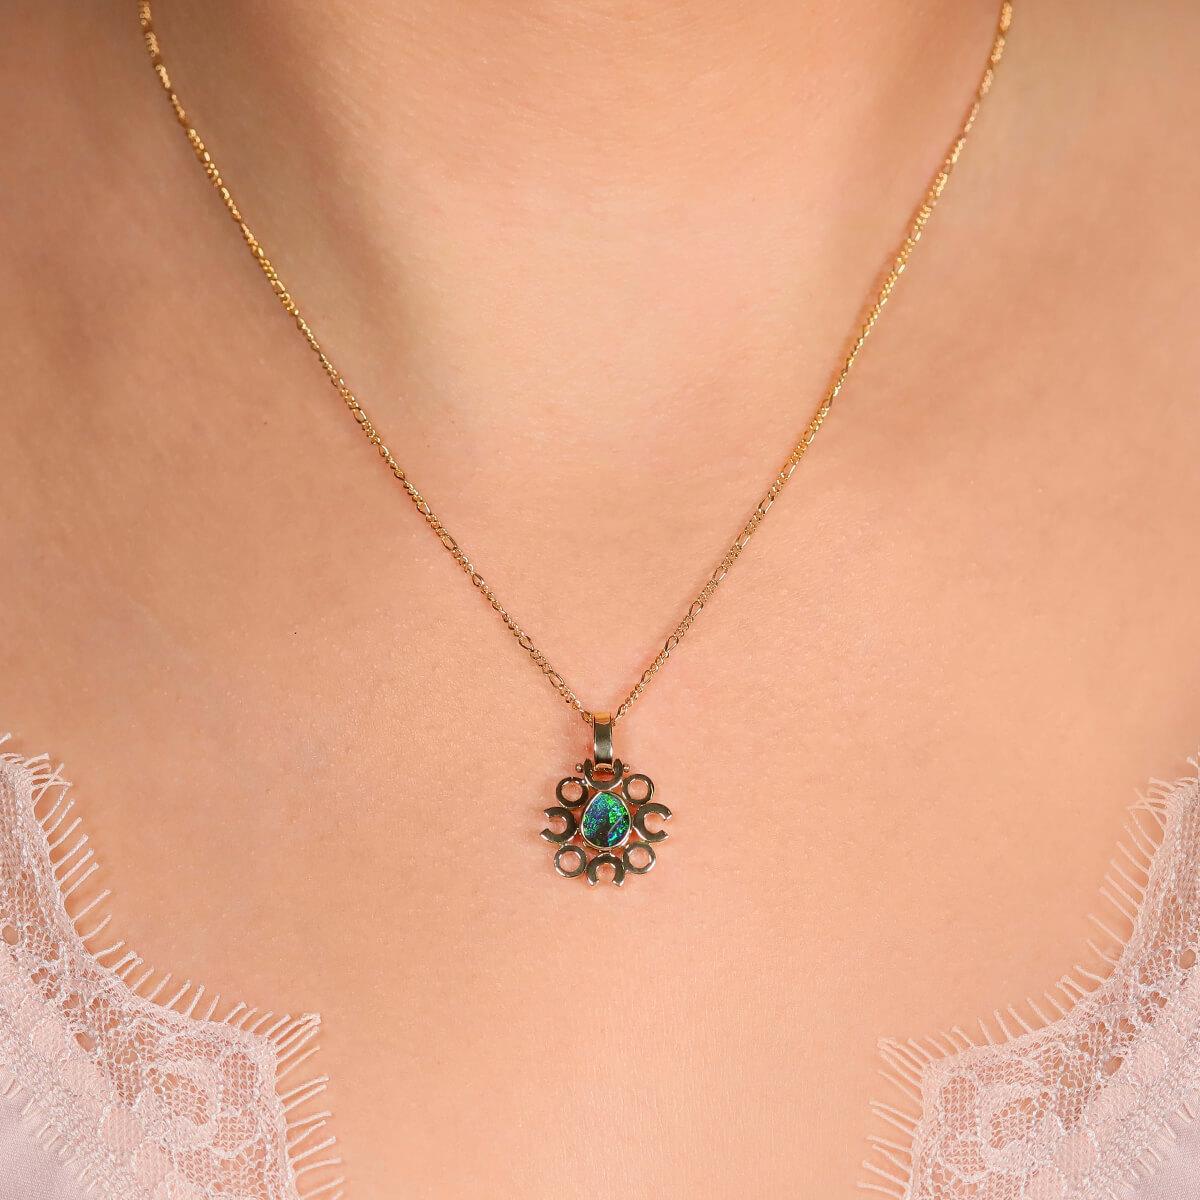 A bright green and blue boulder opal at its heart, this cute and quirky pendant makes for the perfect everyday necklace. Set in solid 18K yellow gold and paired with a solid 18K gold chain, it will brighten your day every time you catch a glimpse of